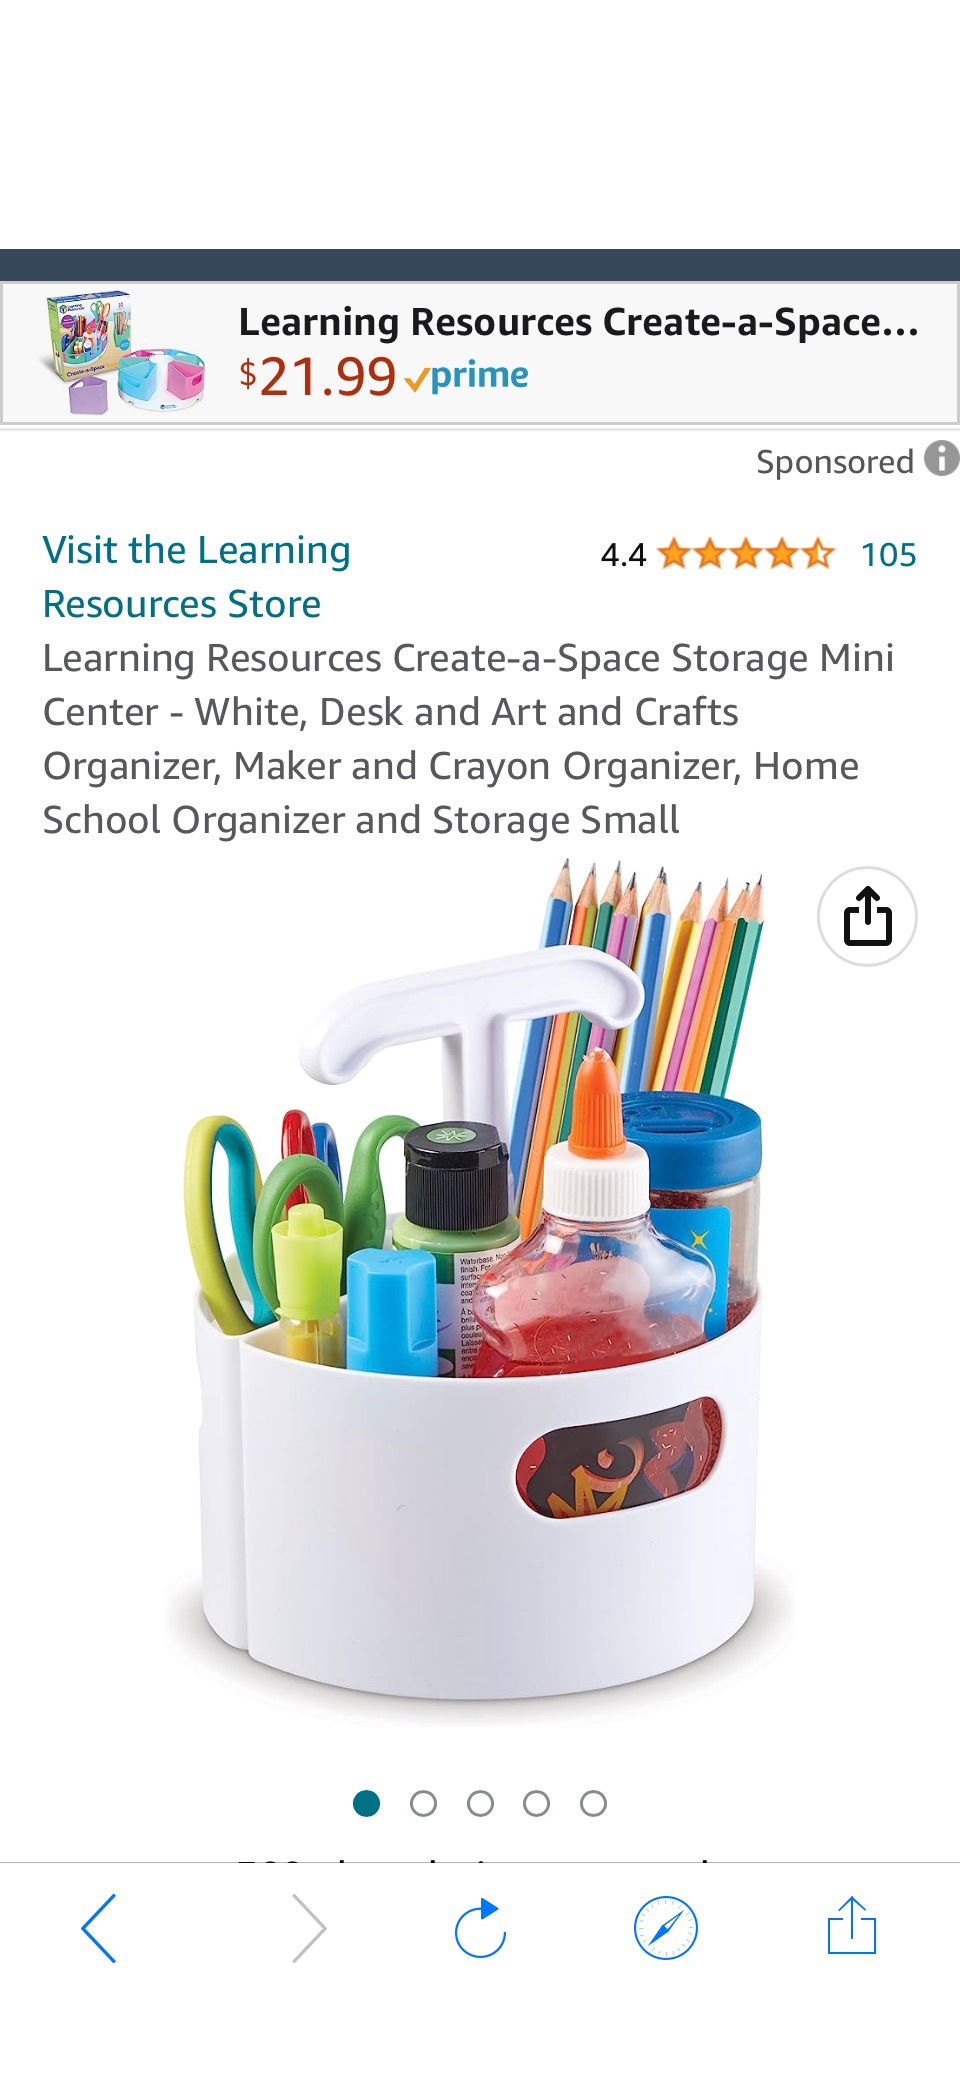 Amazon.com: Learning Resources Create-a-Space Storage Mini Center - White, Desk and Art and Crafts Organizer, Maker and Crayon Organizer, Home School Organizer and Storage Small : Arts, Crafts & Sewing原价11.99